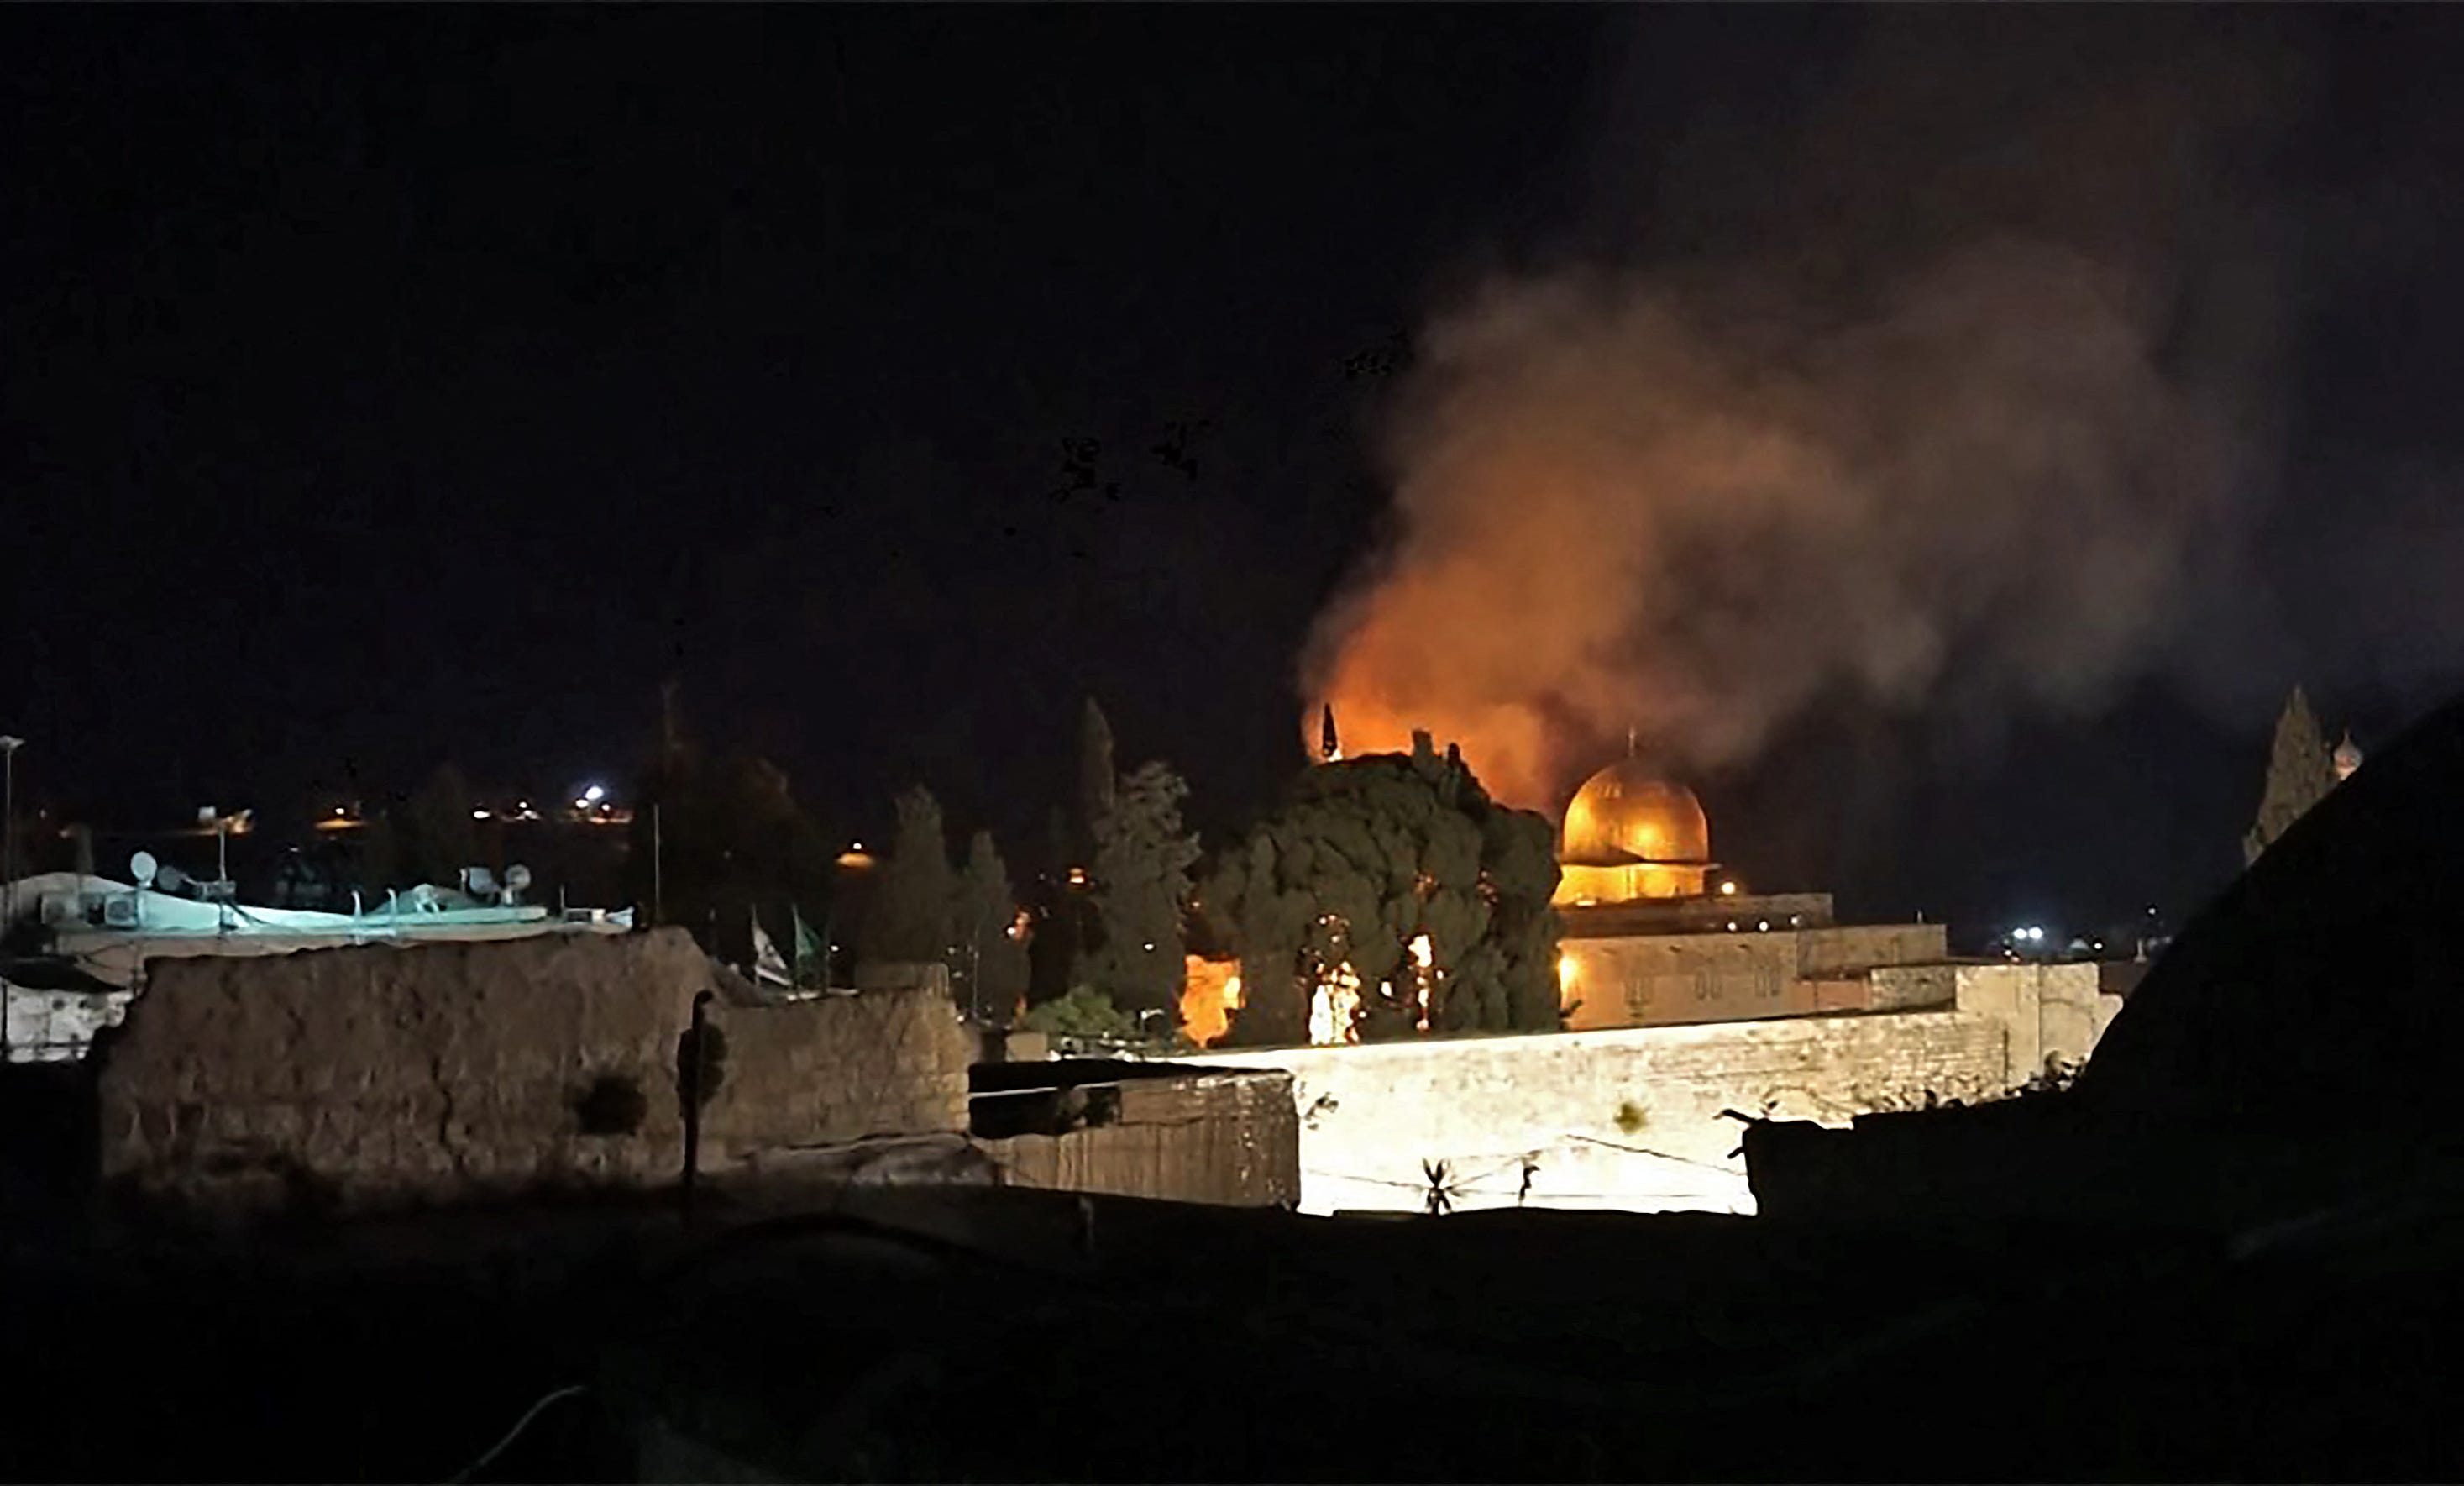 Al Aqsa Mosque Taken From Prayer To Violence Divergent Photos From One Of Islam S Holiest Sites